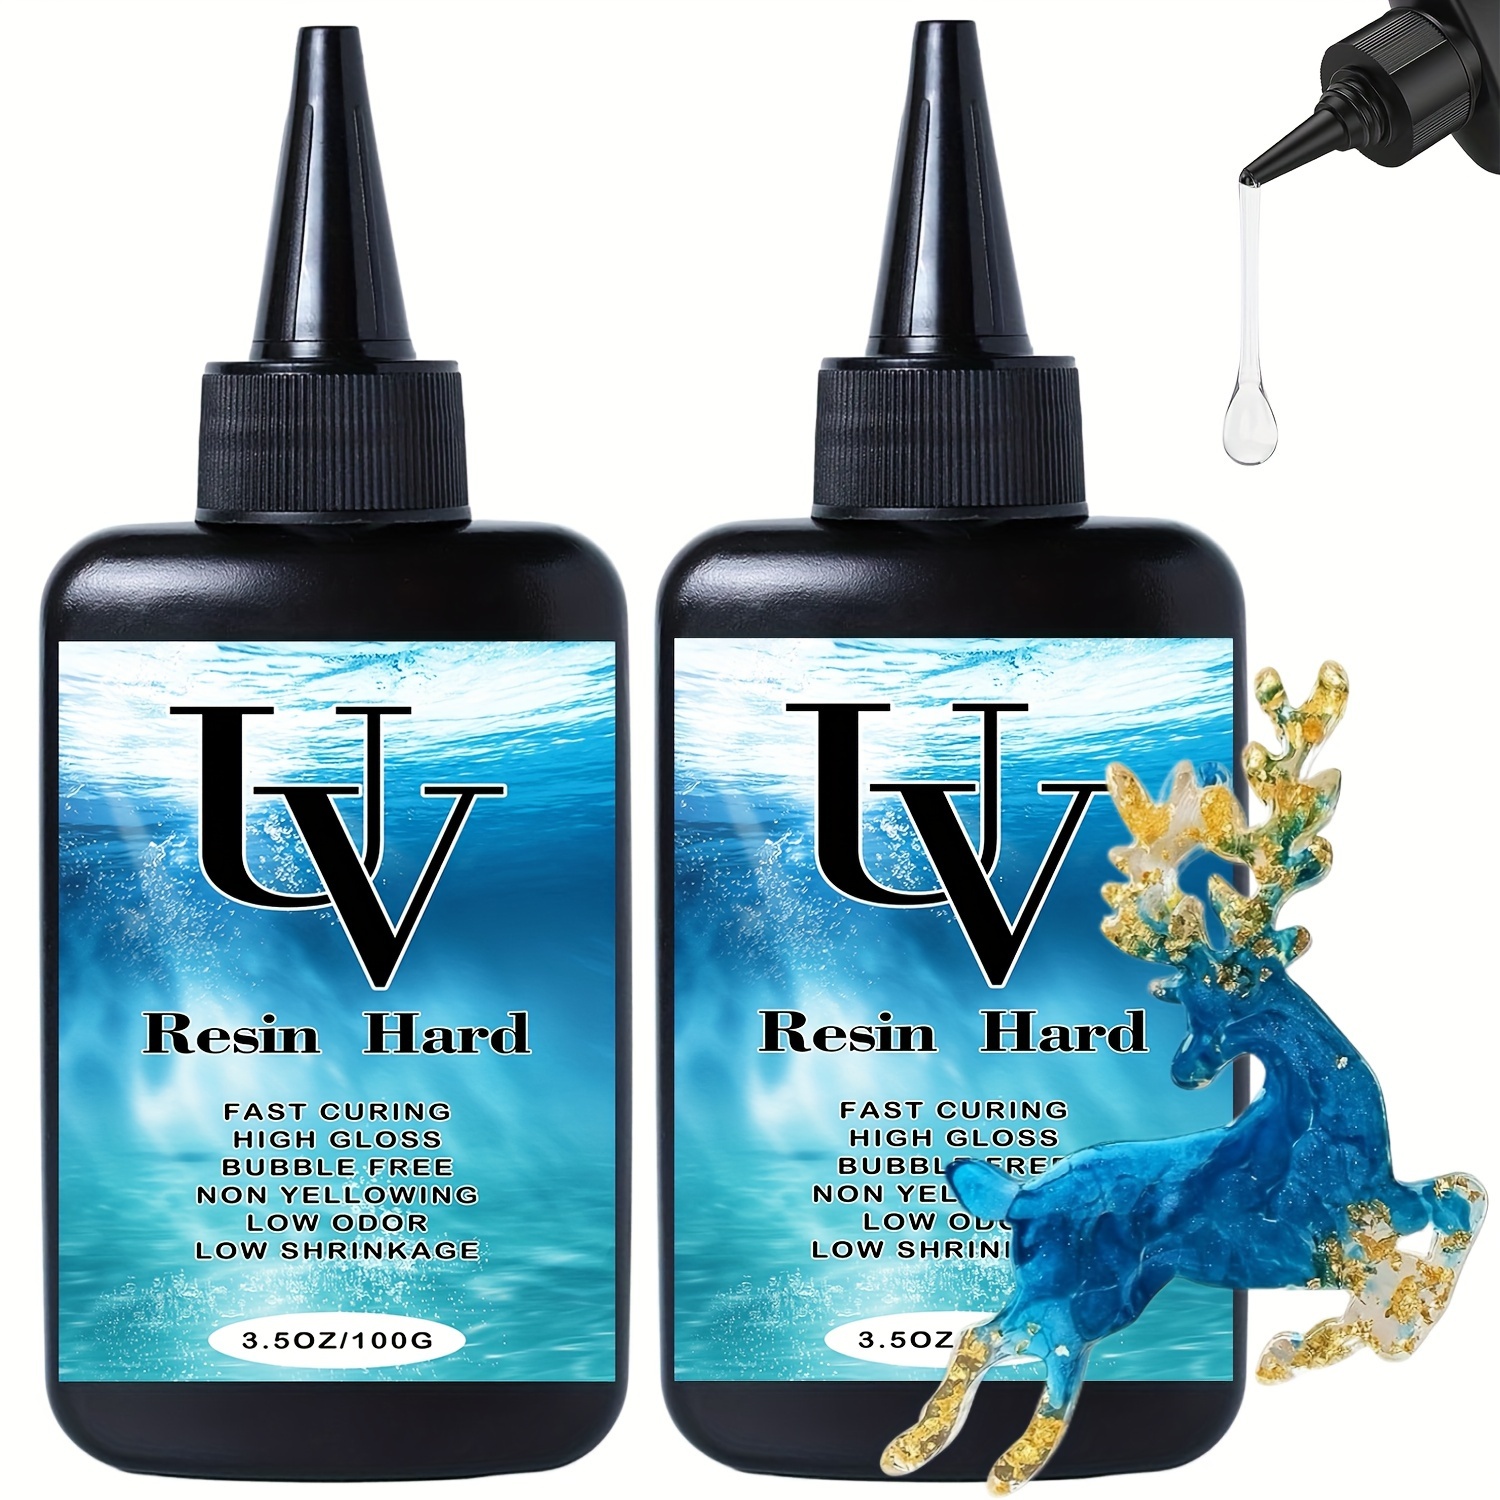 

Crystal Clear Uv Resin 7.05oz/1.1lbs - Low Viscosity, Fast-curing, Non-yellowing Epoxy For Jewelry Casting, High Gloss Finish, Bubble-free, Ideal For Crafts & Molds - No Power Supply Needed